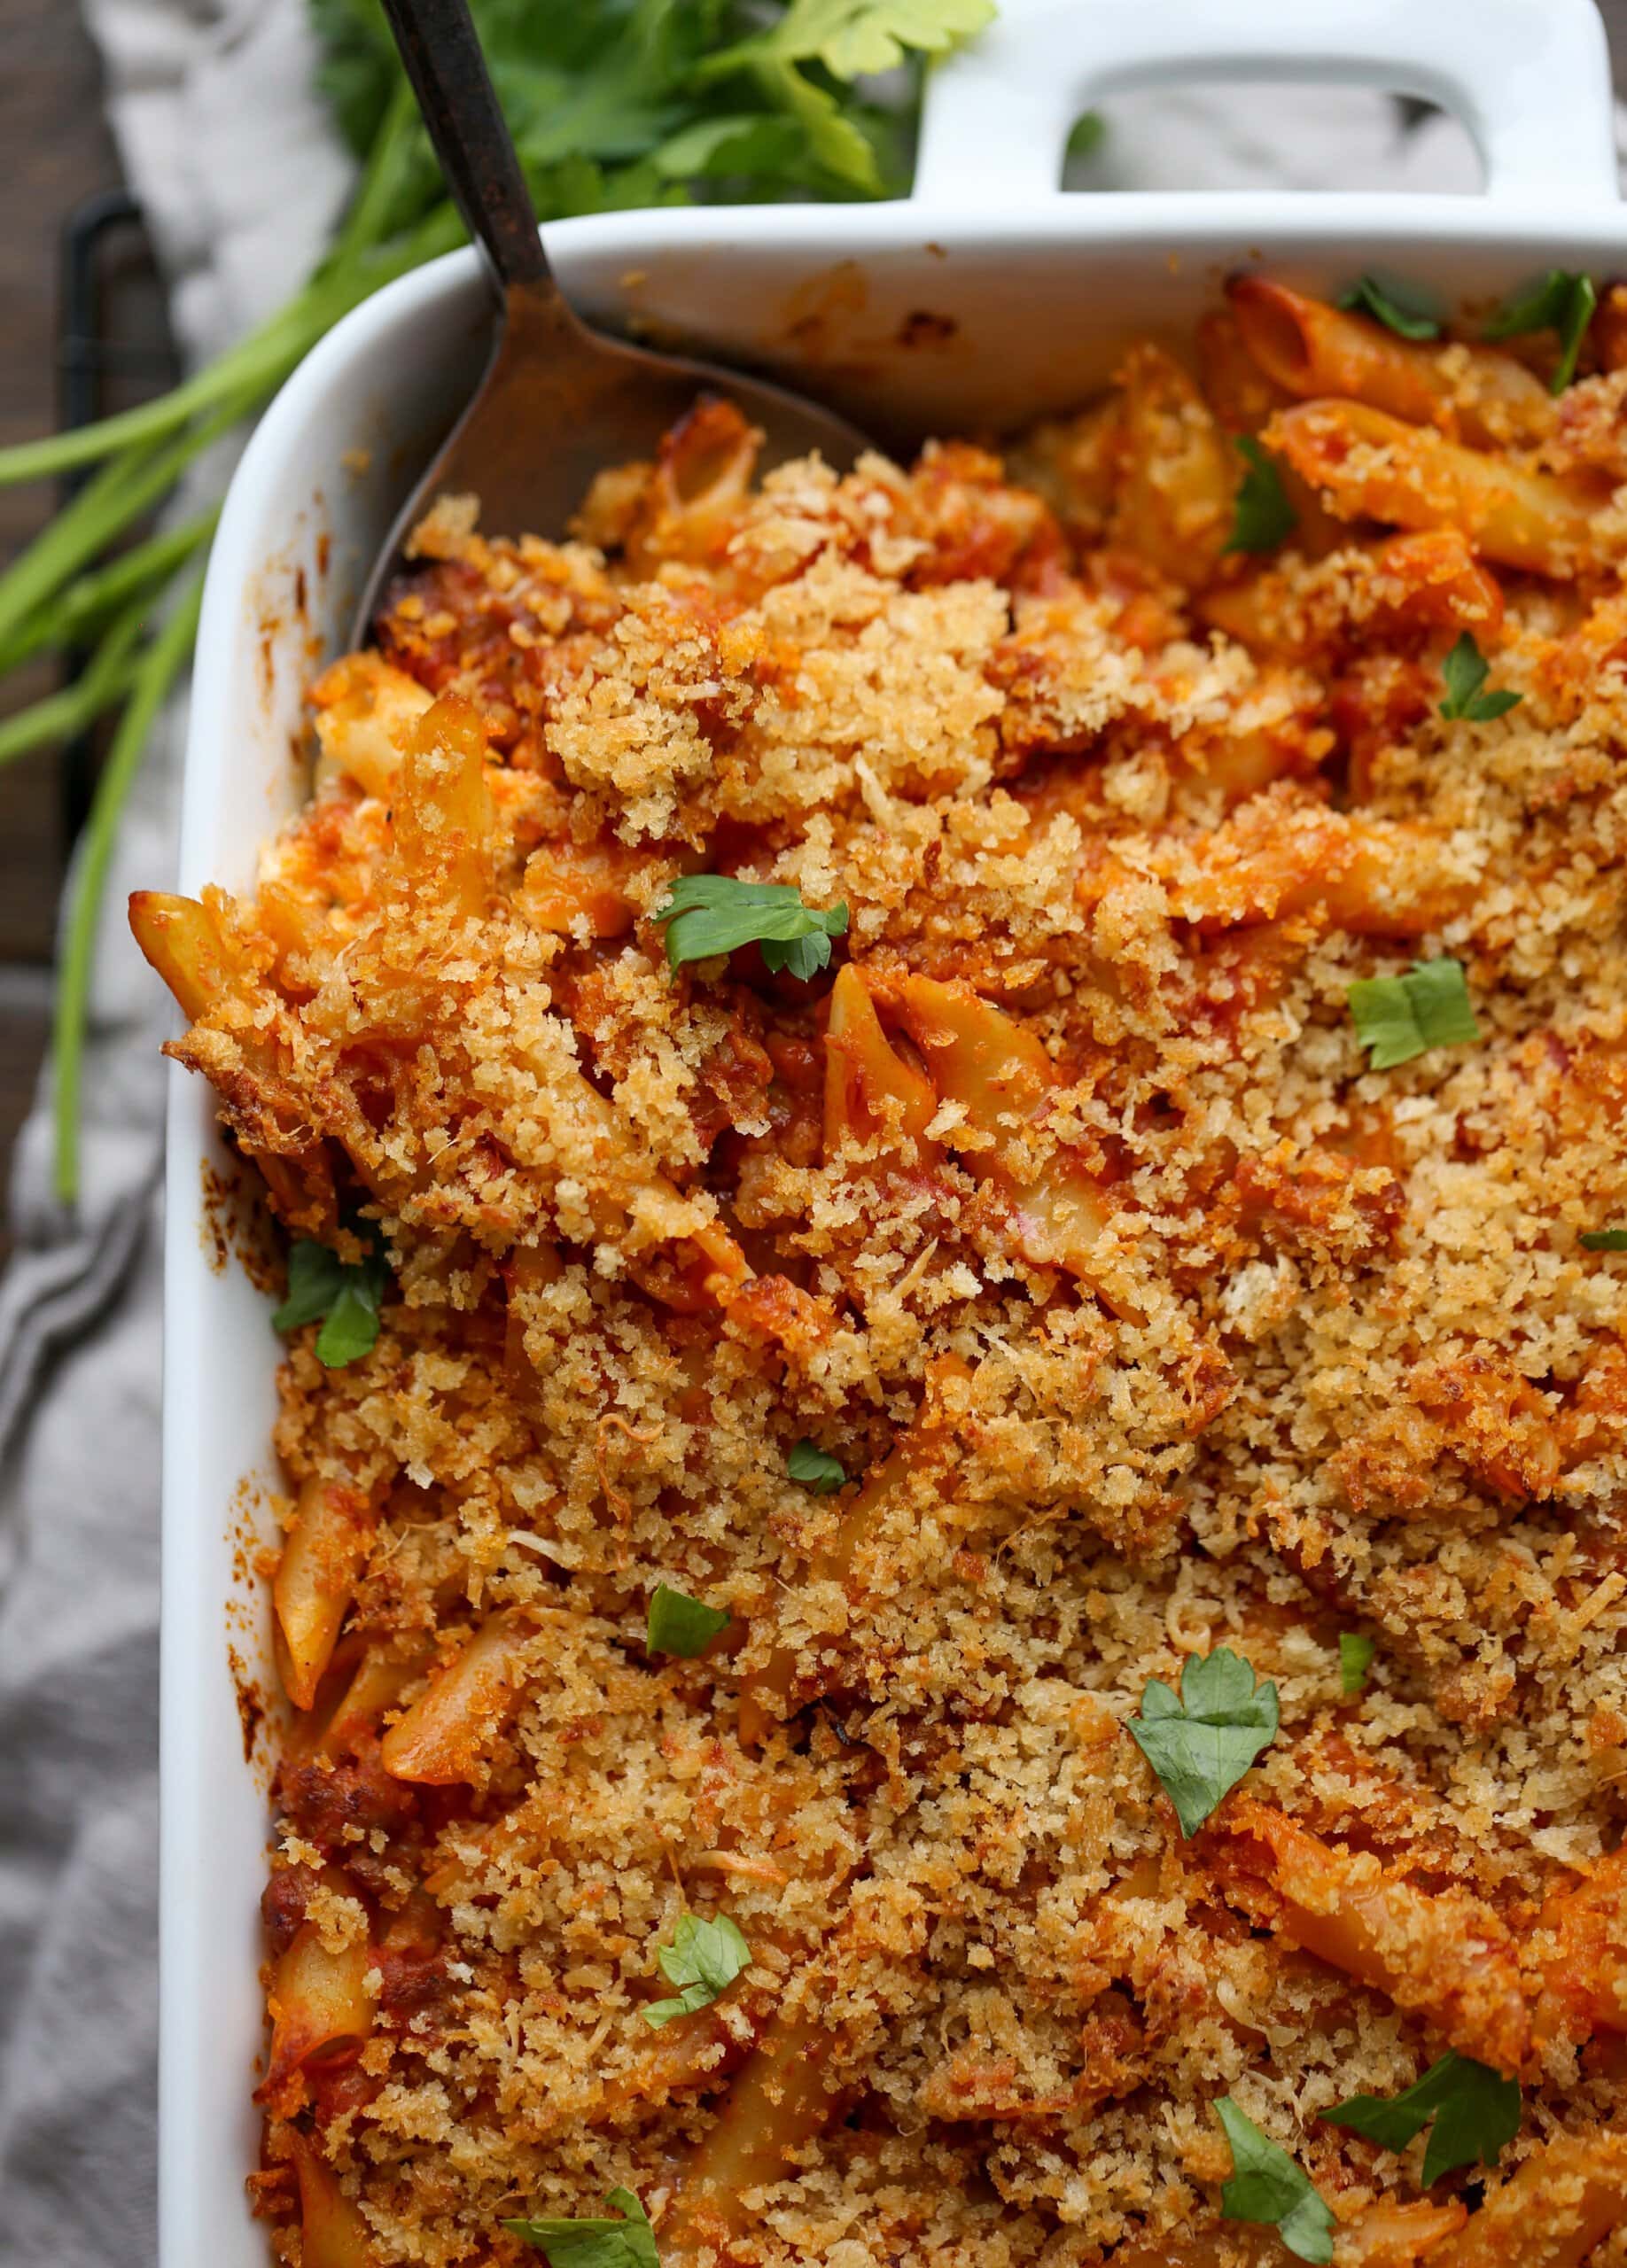 Baked mostaccioli topped with parmesan cheese, breadcrumbs and fresh herbs.